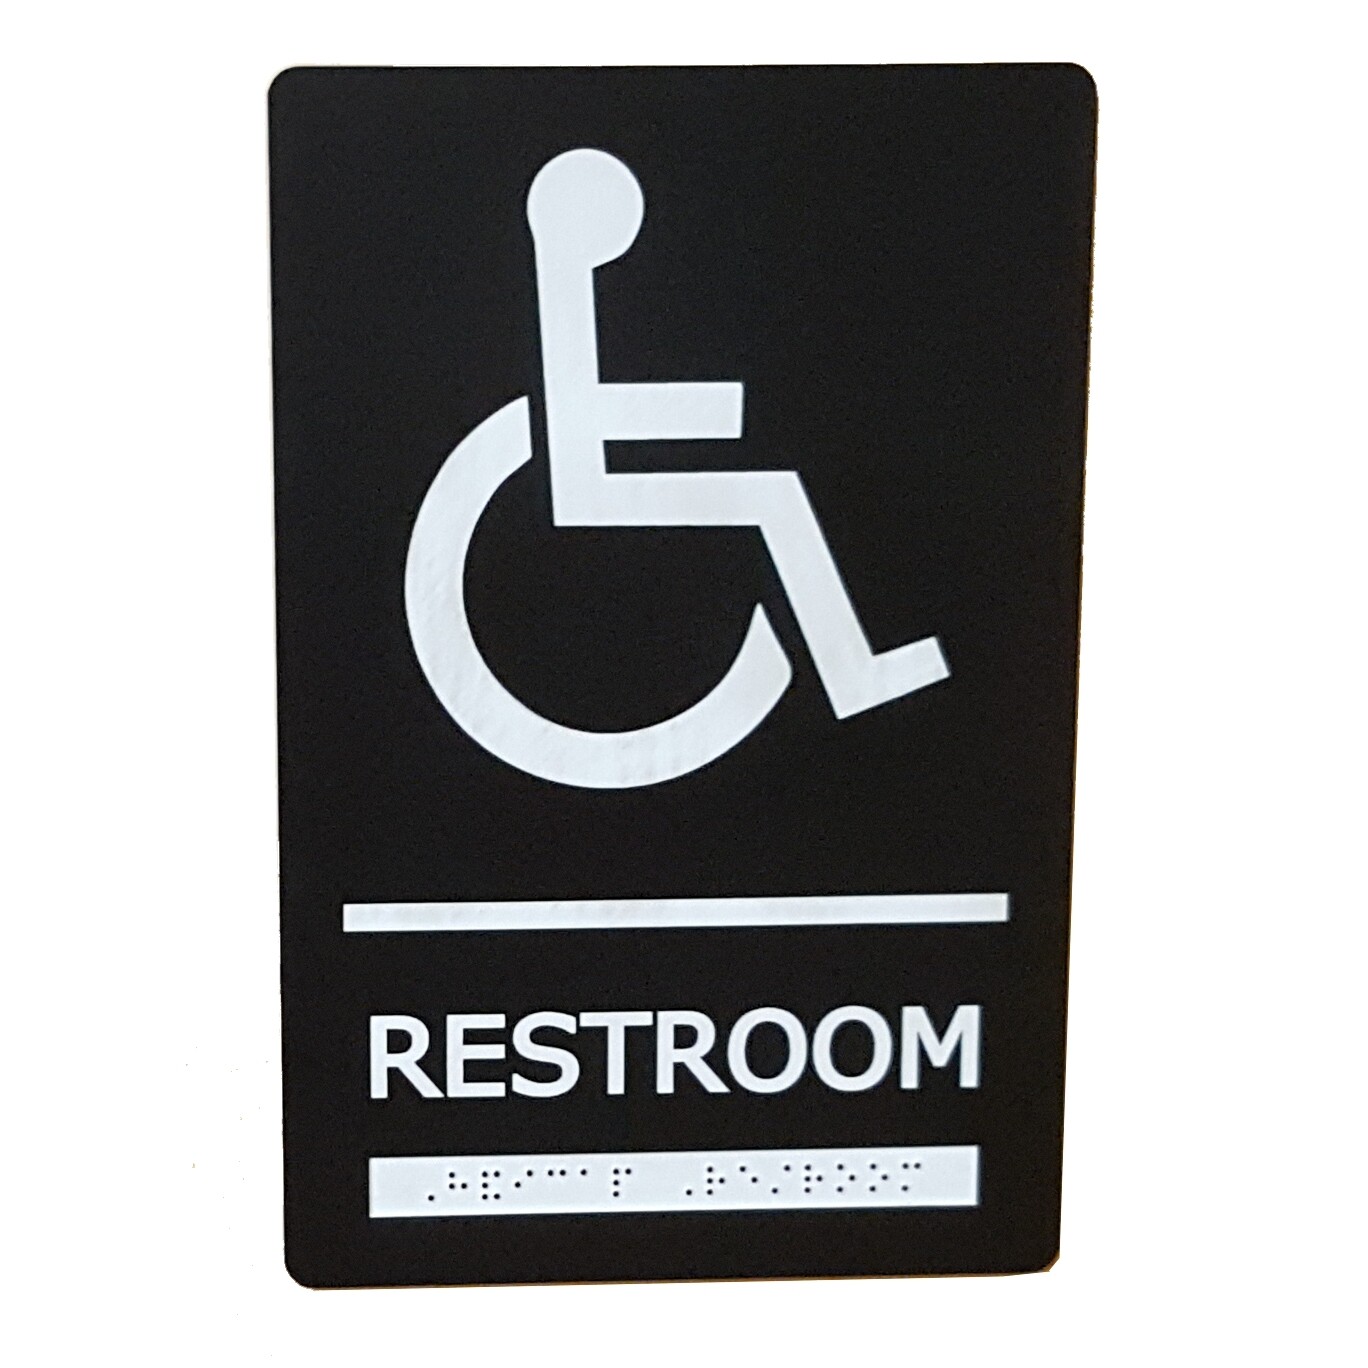 Braille Restroom Sign with Pictogram